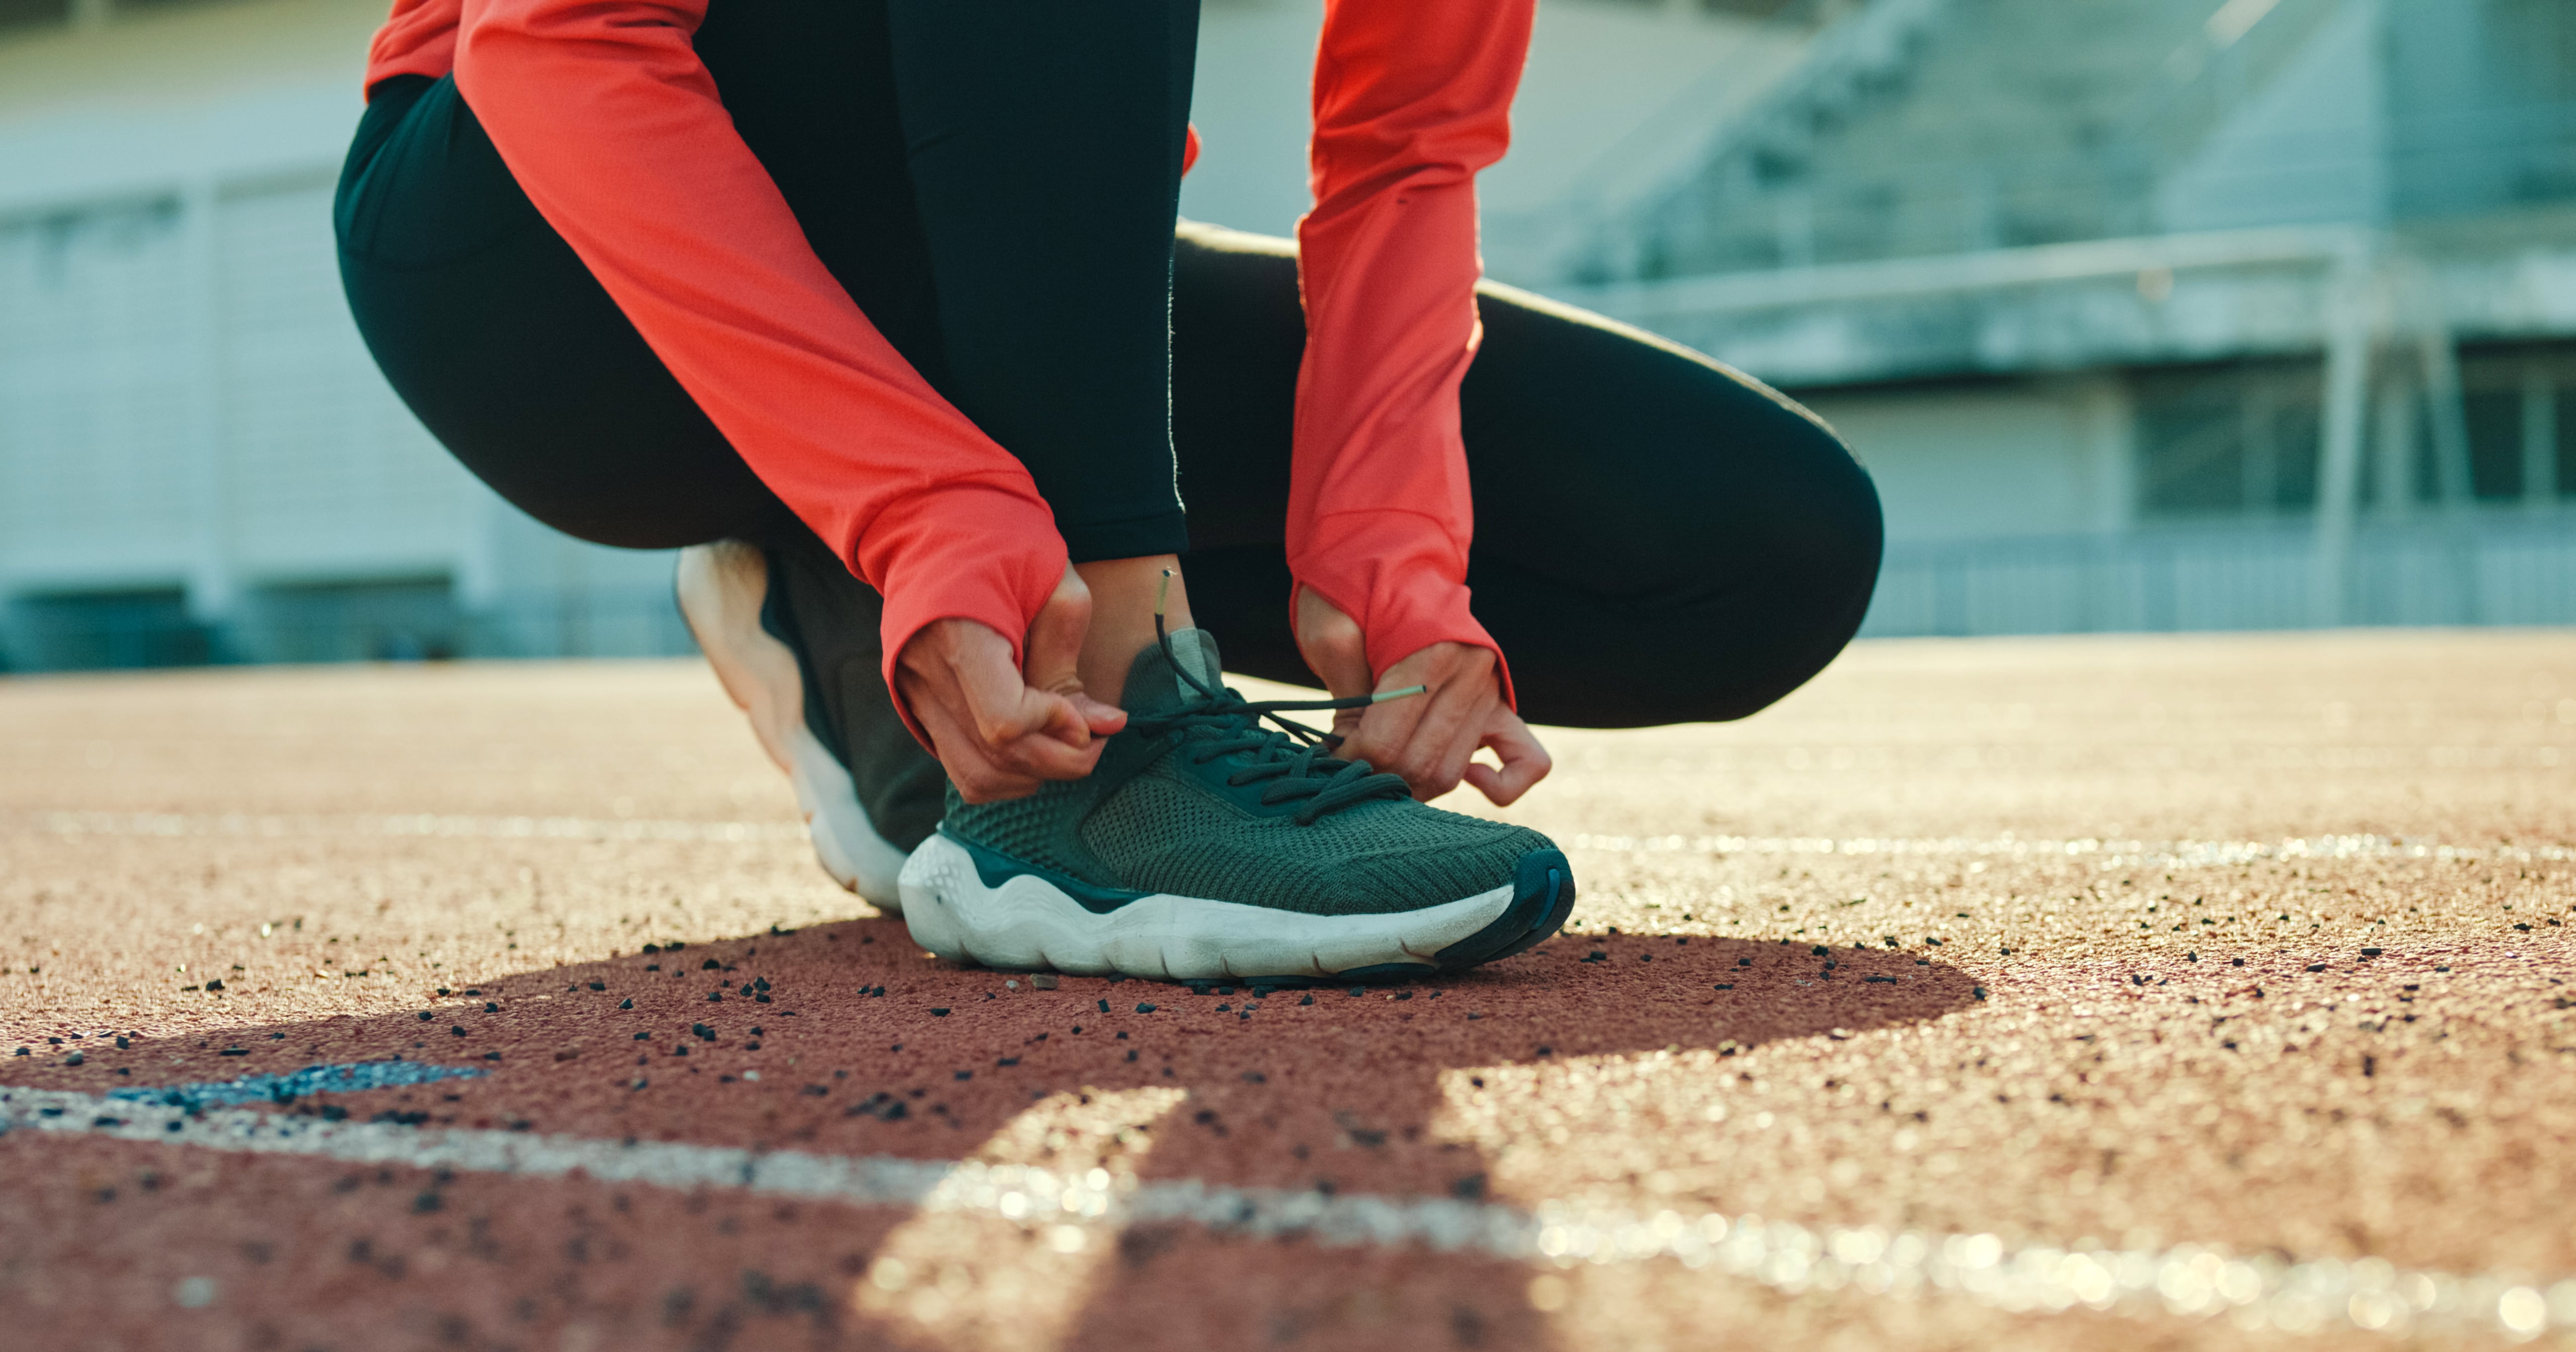 The 8 Best Running Shoes For Flat Feet, According to a Podiatrist